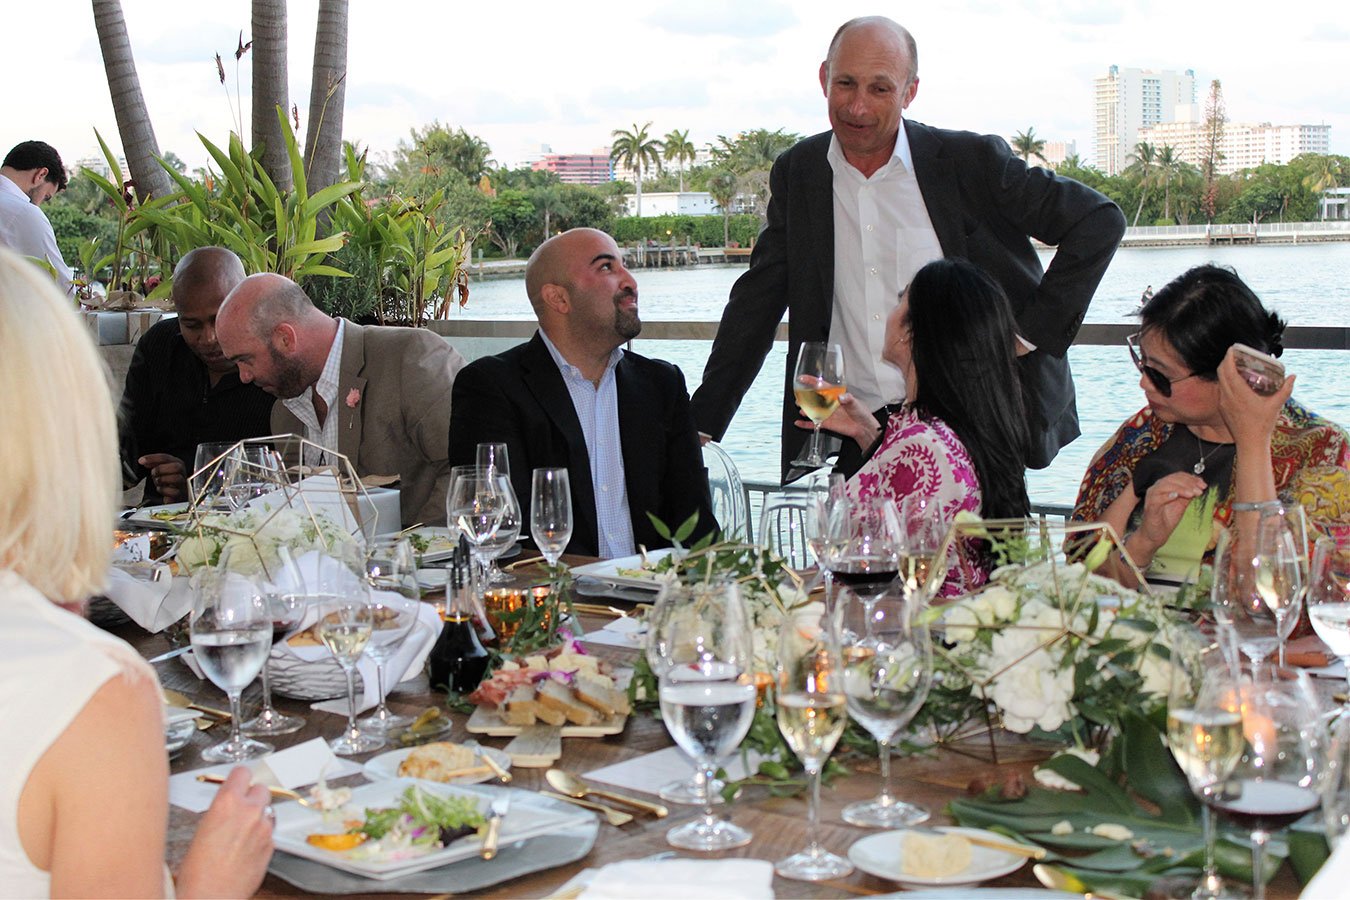 Dinner guests with architect Piero Lissoni at a Ritz Residences Miami Beach dinner